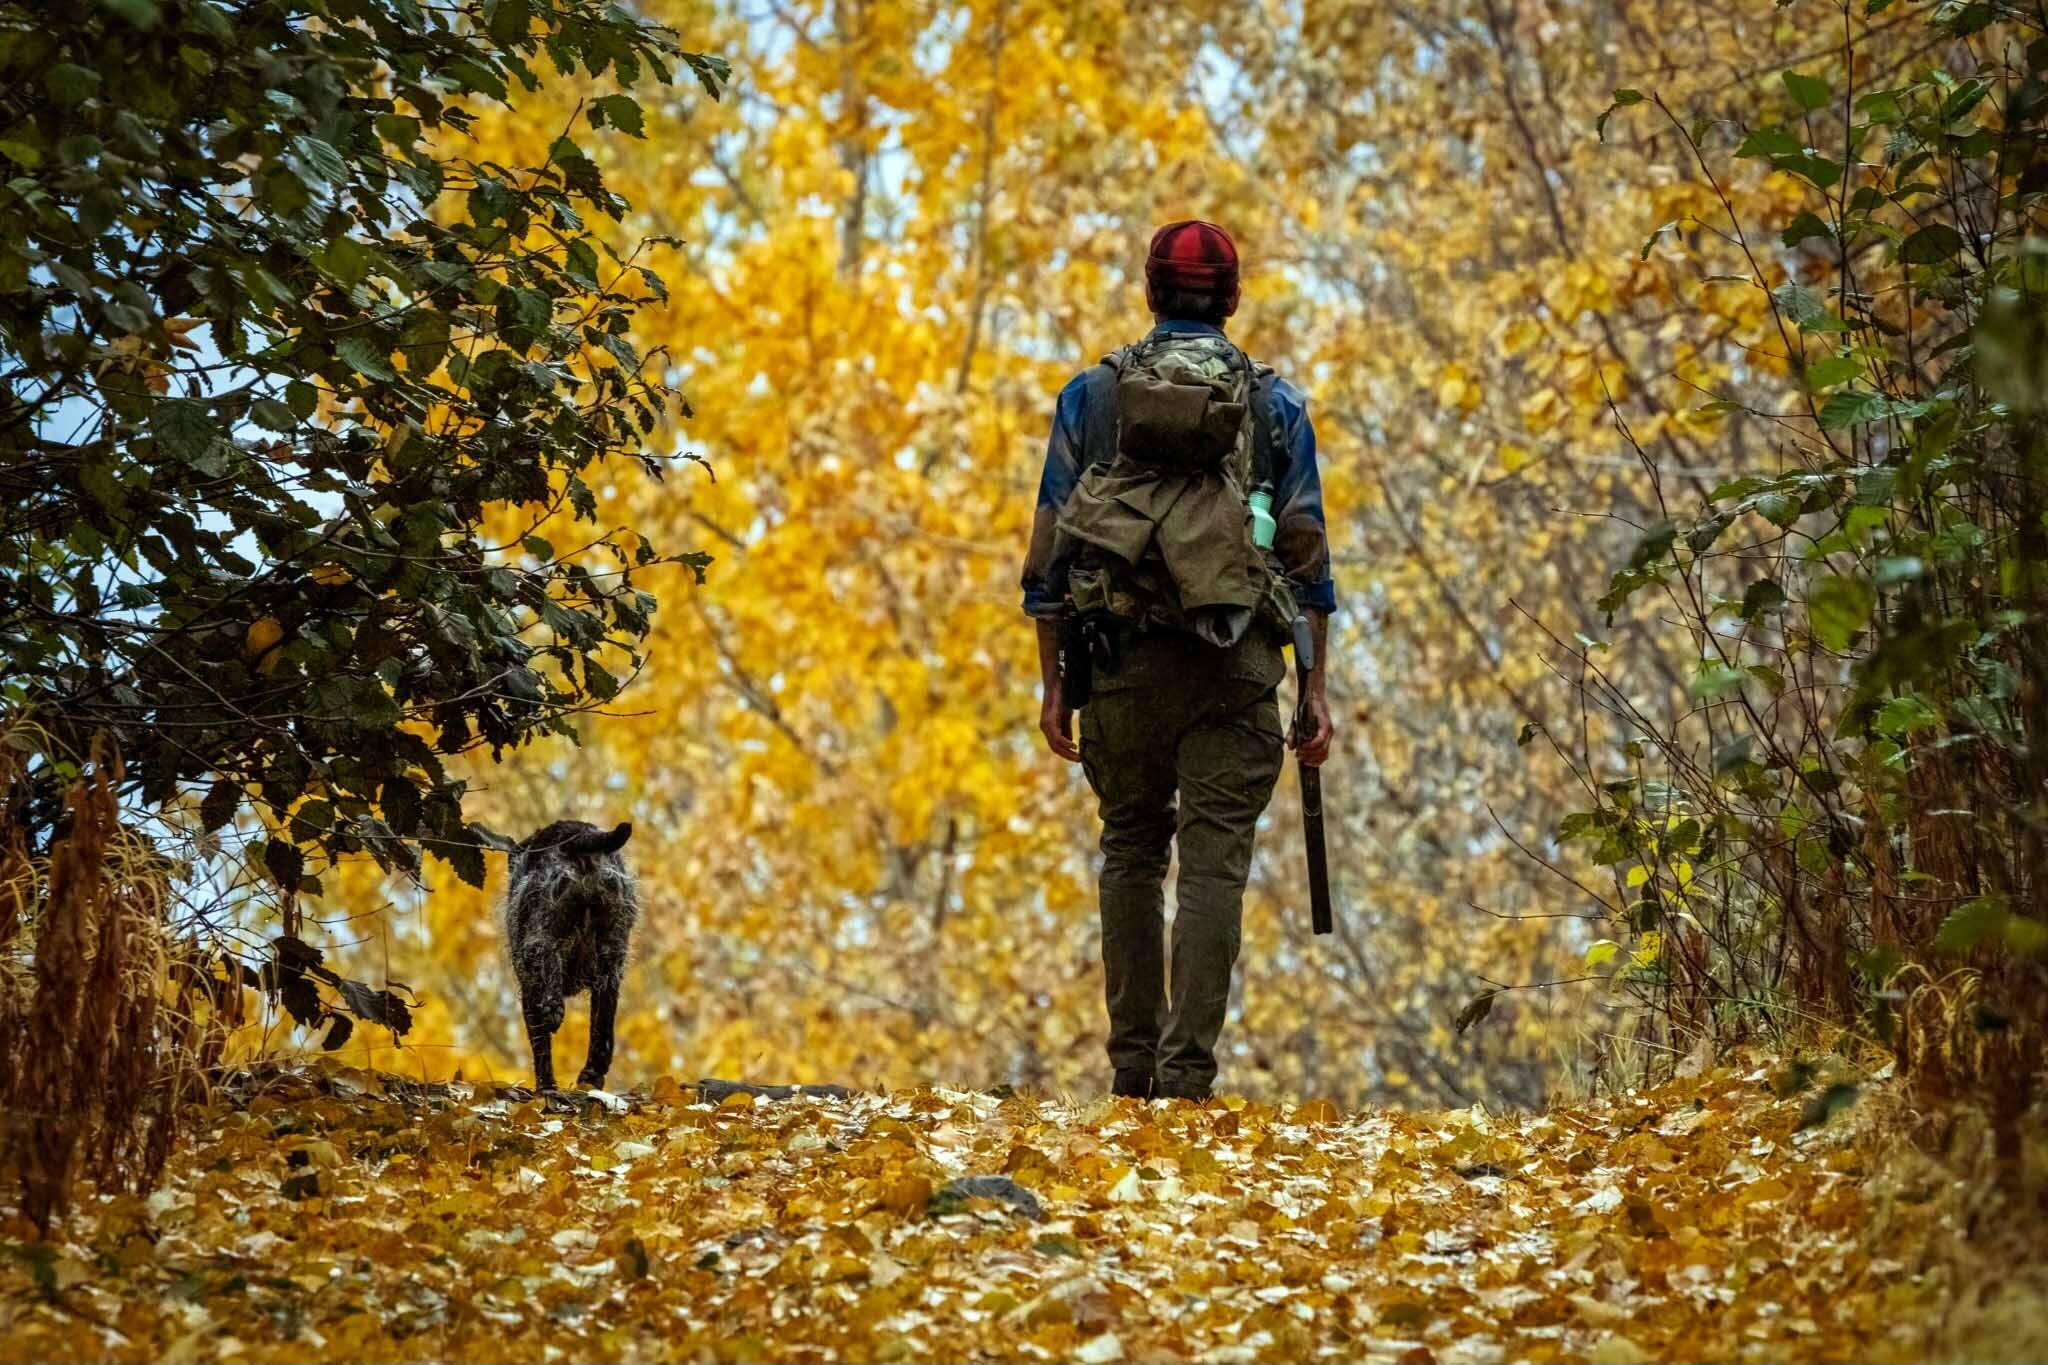 Fall colors, a dog and game in hand make for great outdoor experiences on the Kenai National Wildlife Refuge. (Photo by Colin Canterbury/USFWS)